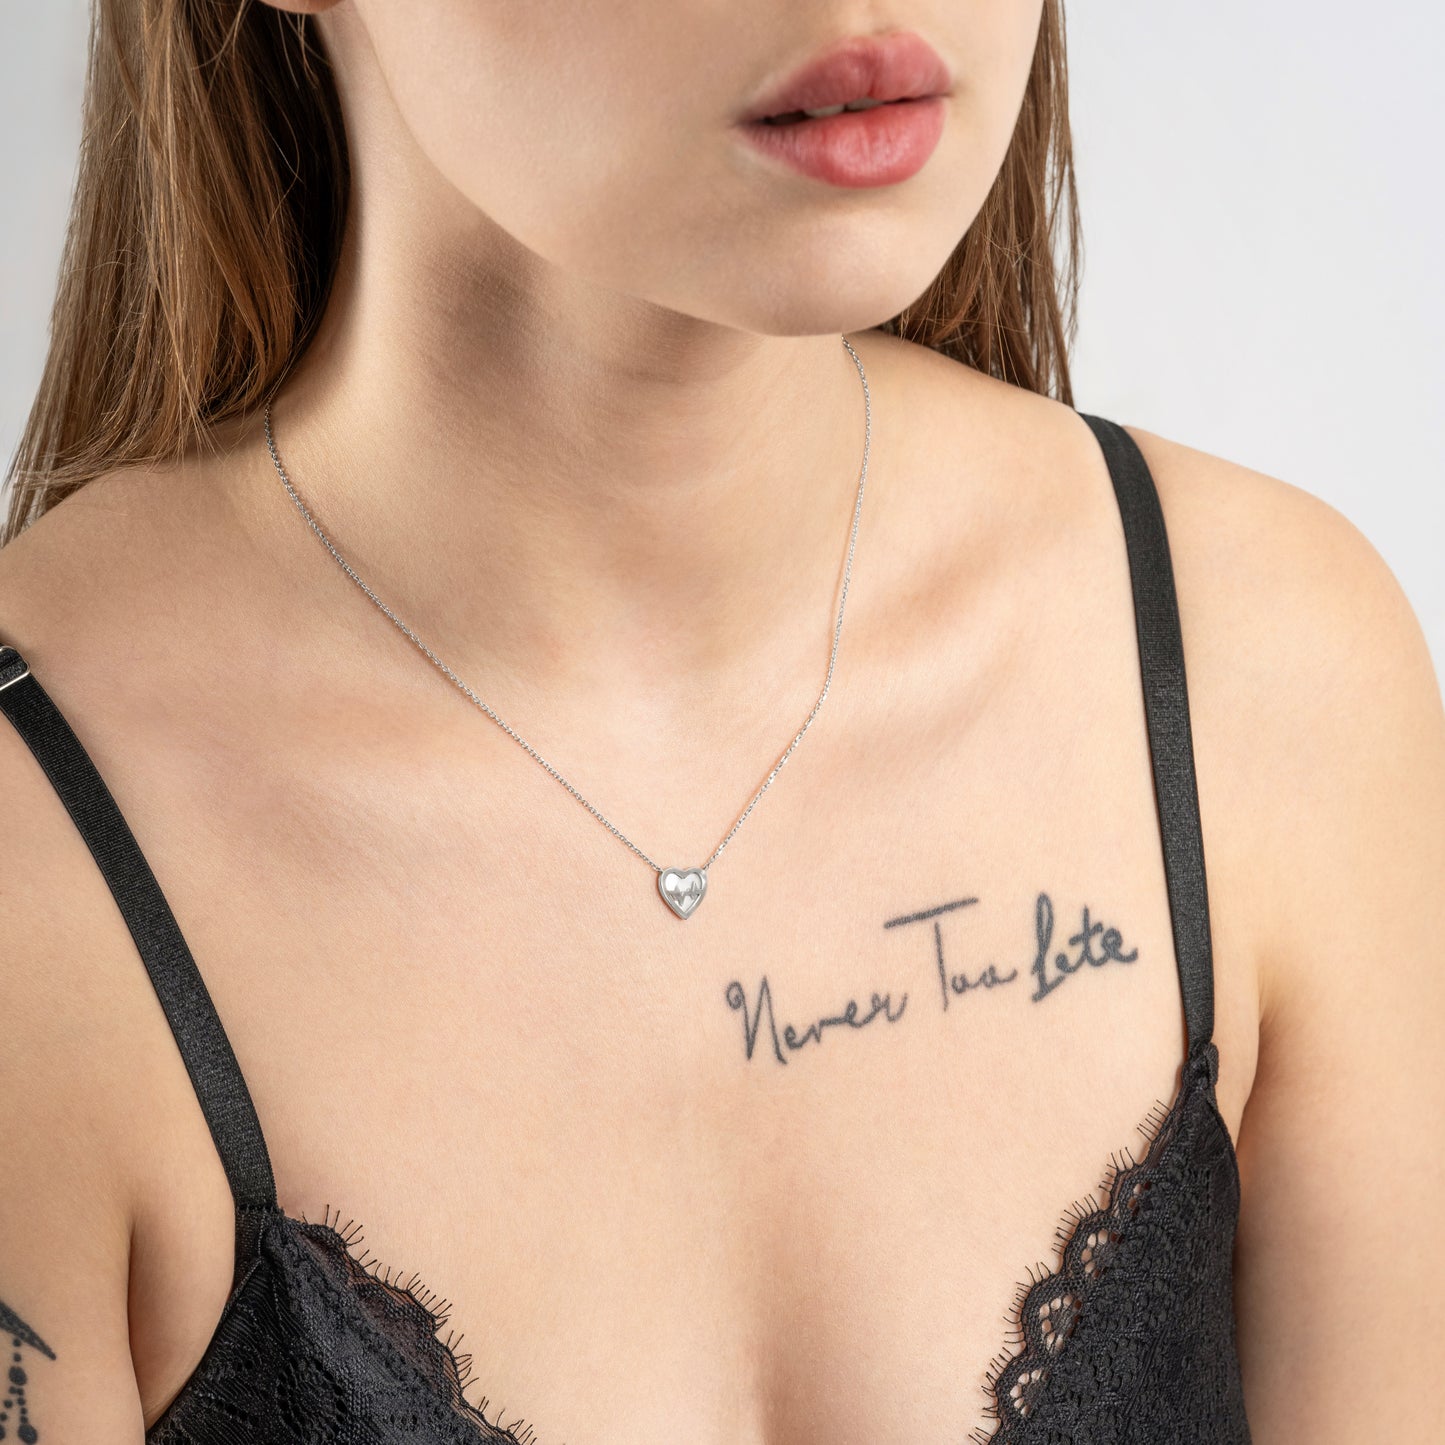 A model wearing Heartbeat Silver Necklace on her neck